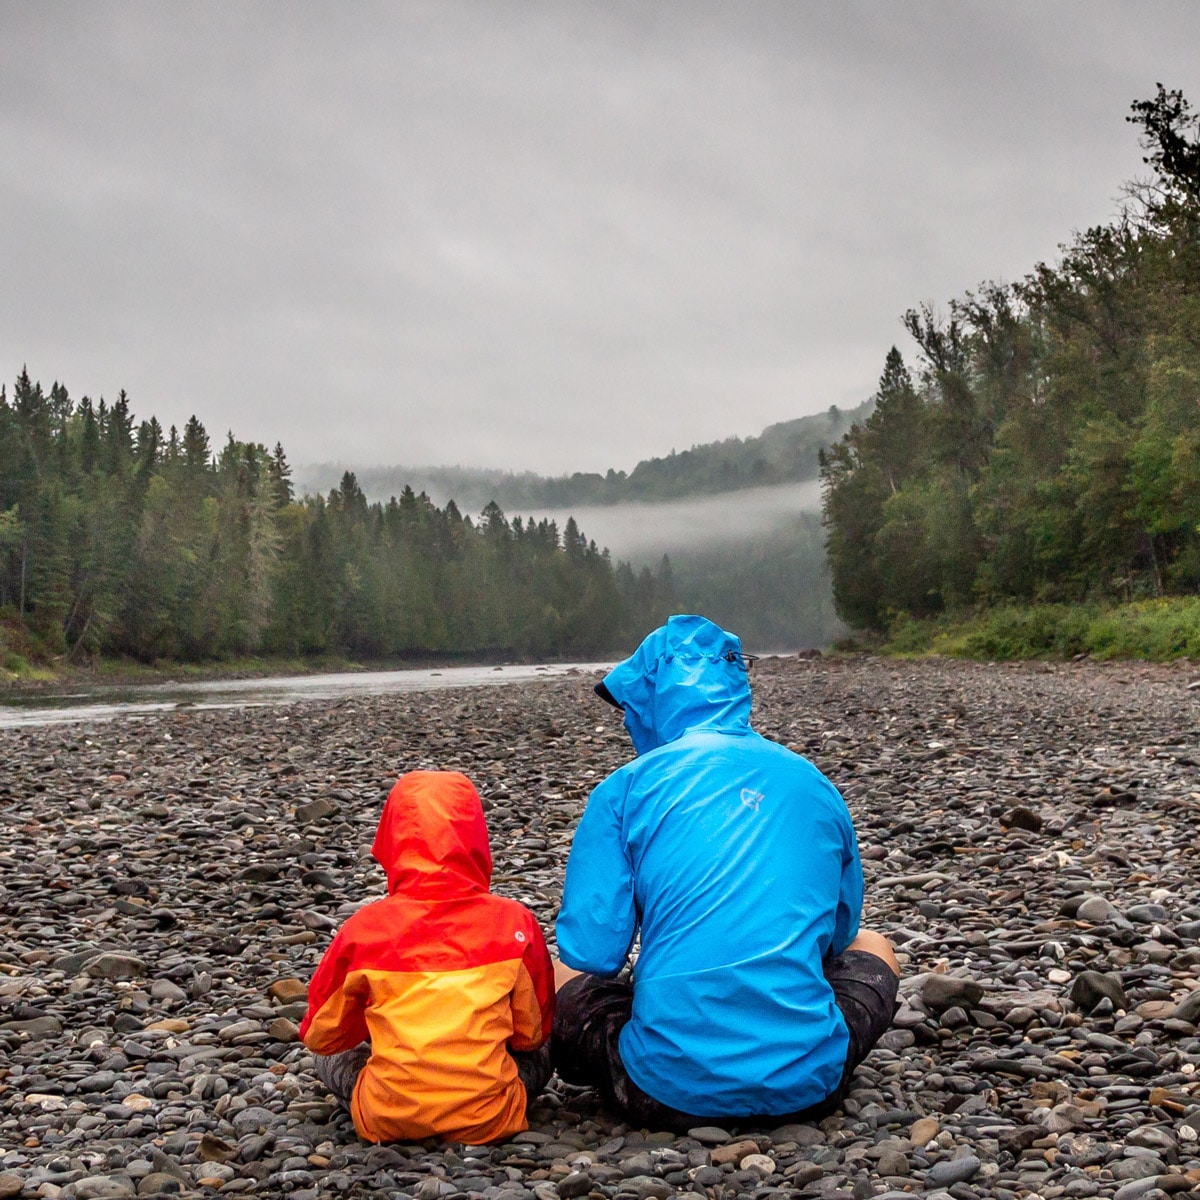 Dad and son sitting by river in forest